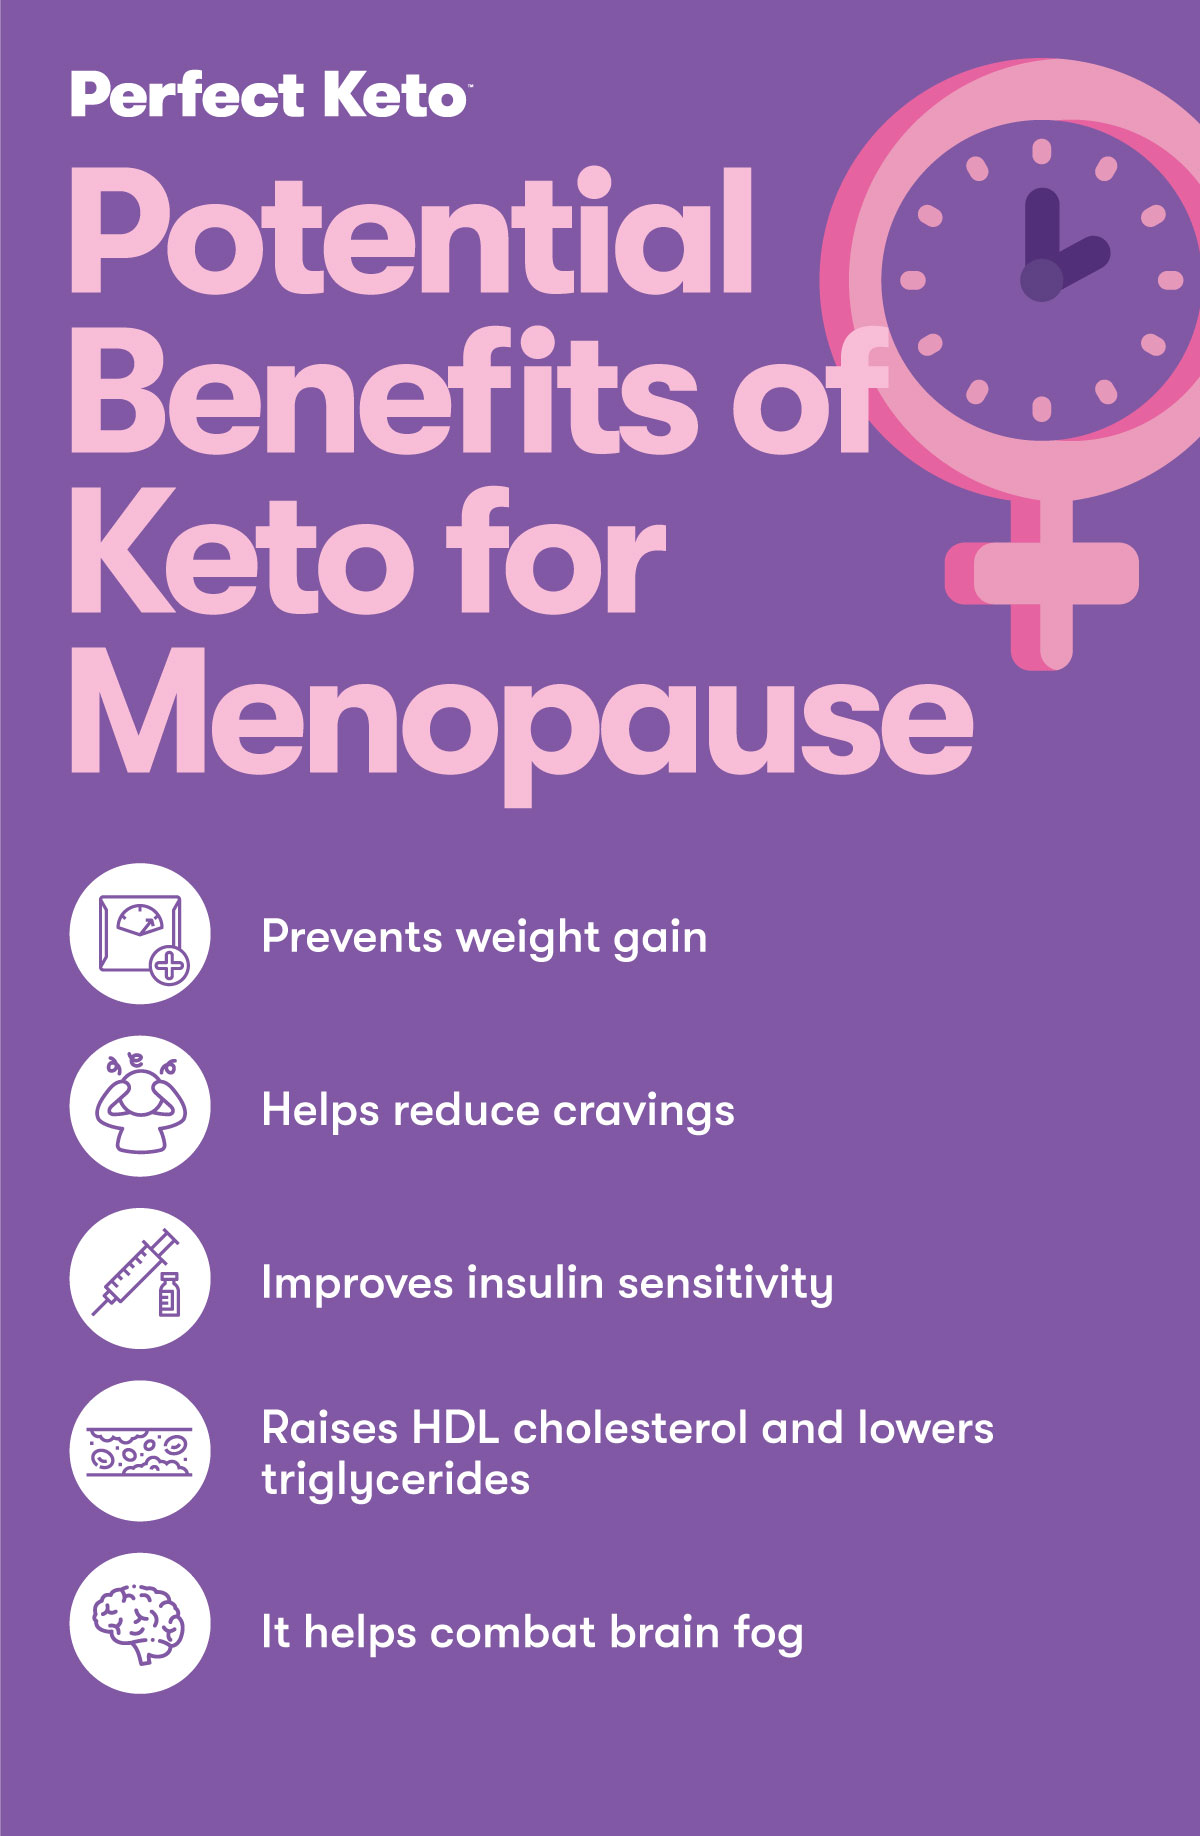 benefits of keto for menopause